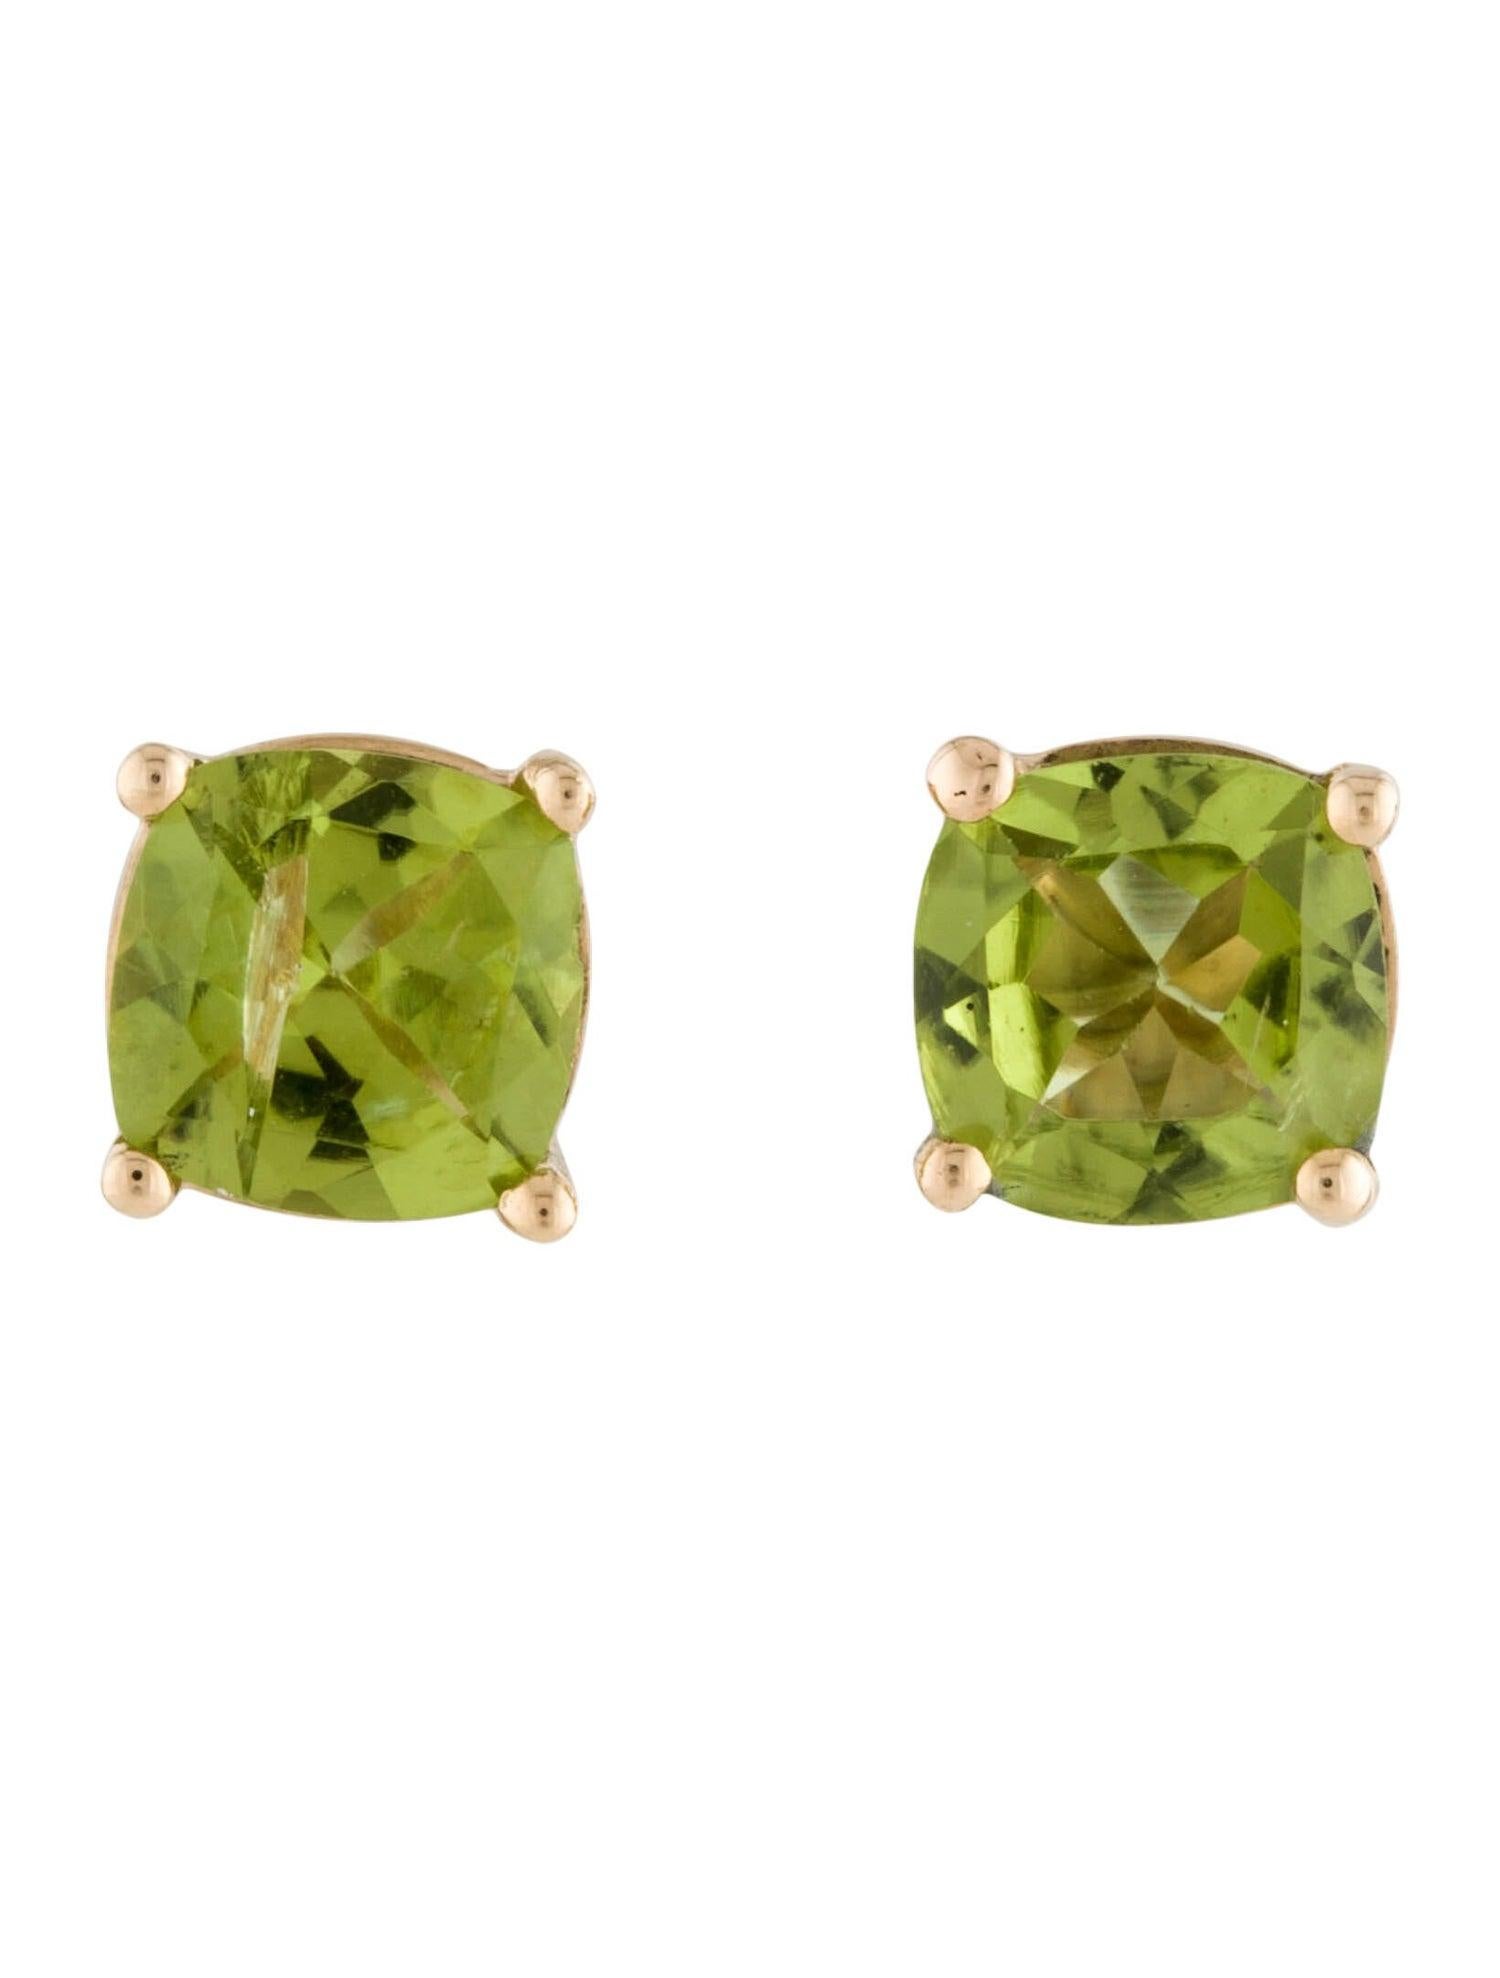 Elevate your style with our stunning 14K Yellow Gold Peridot Stud Earrings, featuring 2.78 carats of cushion modified brilliant peridots. These exquisite earrings shine with a vibrant green hue, encapsulating the essence of elegance and